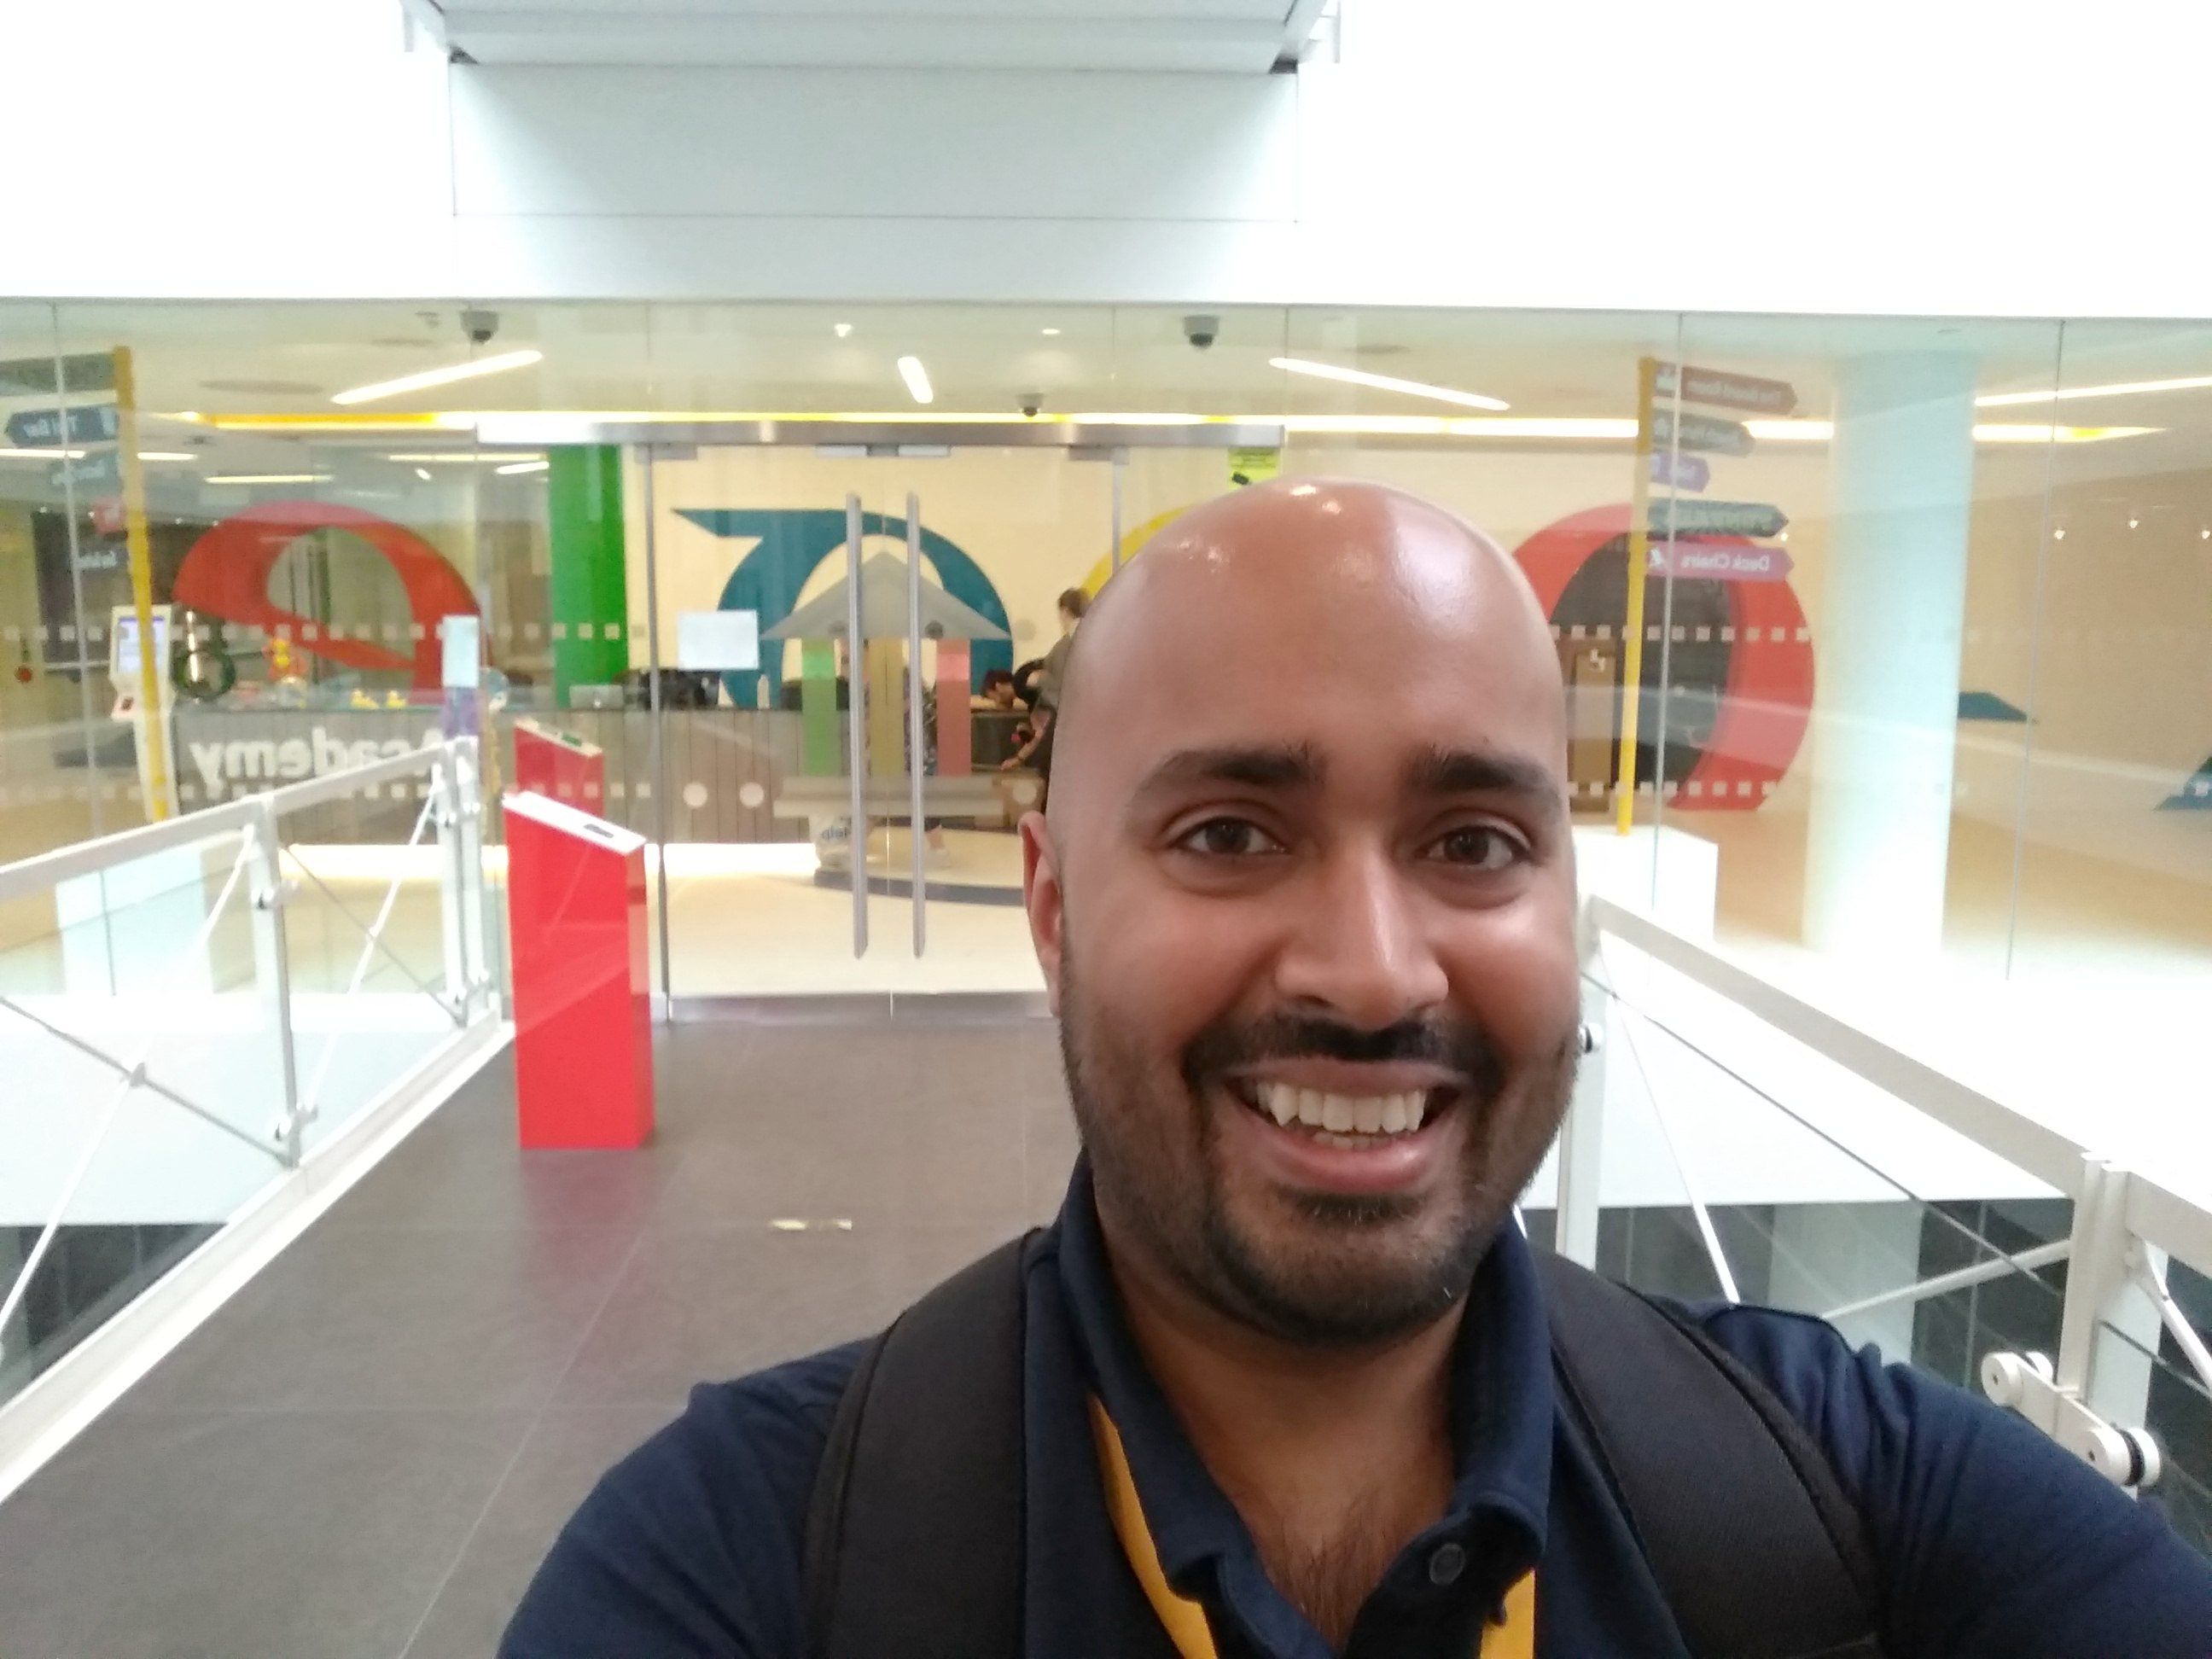 Hi I'm Vik, for the last 10 years I have been involved in HCI, UX, UI, mobile & the web.